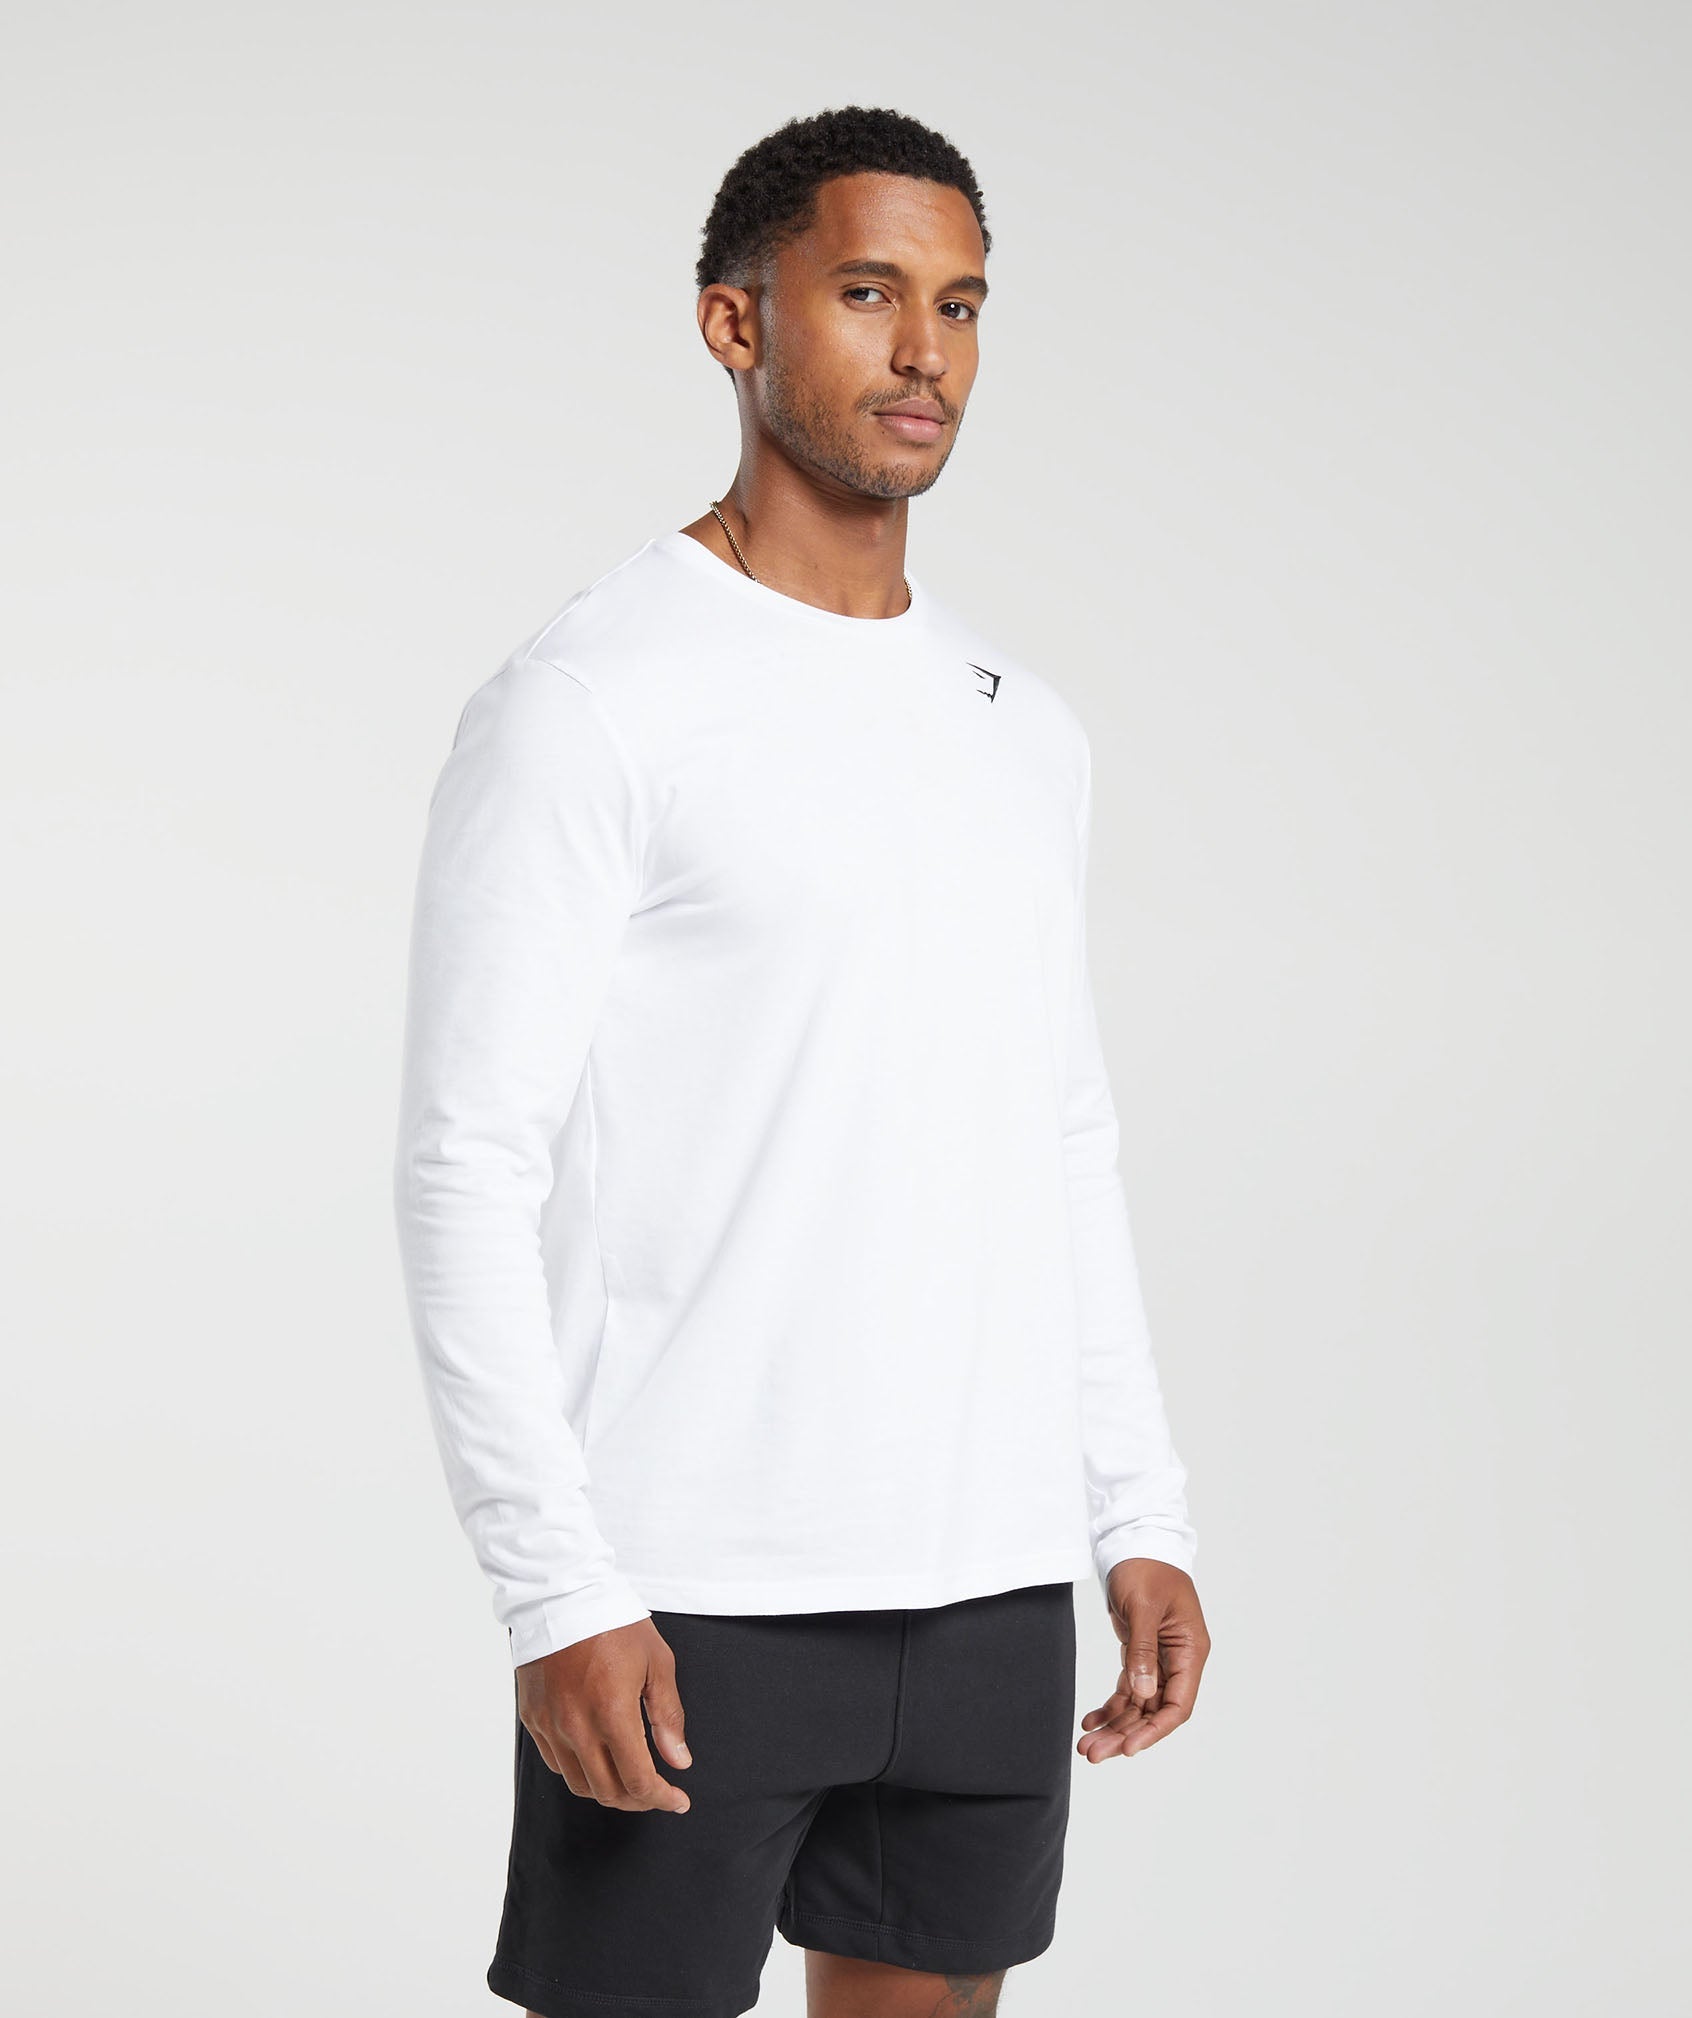 Crest Long Sleeve T-Shirt in White - view 3